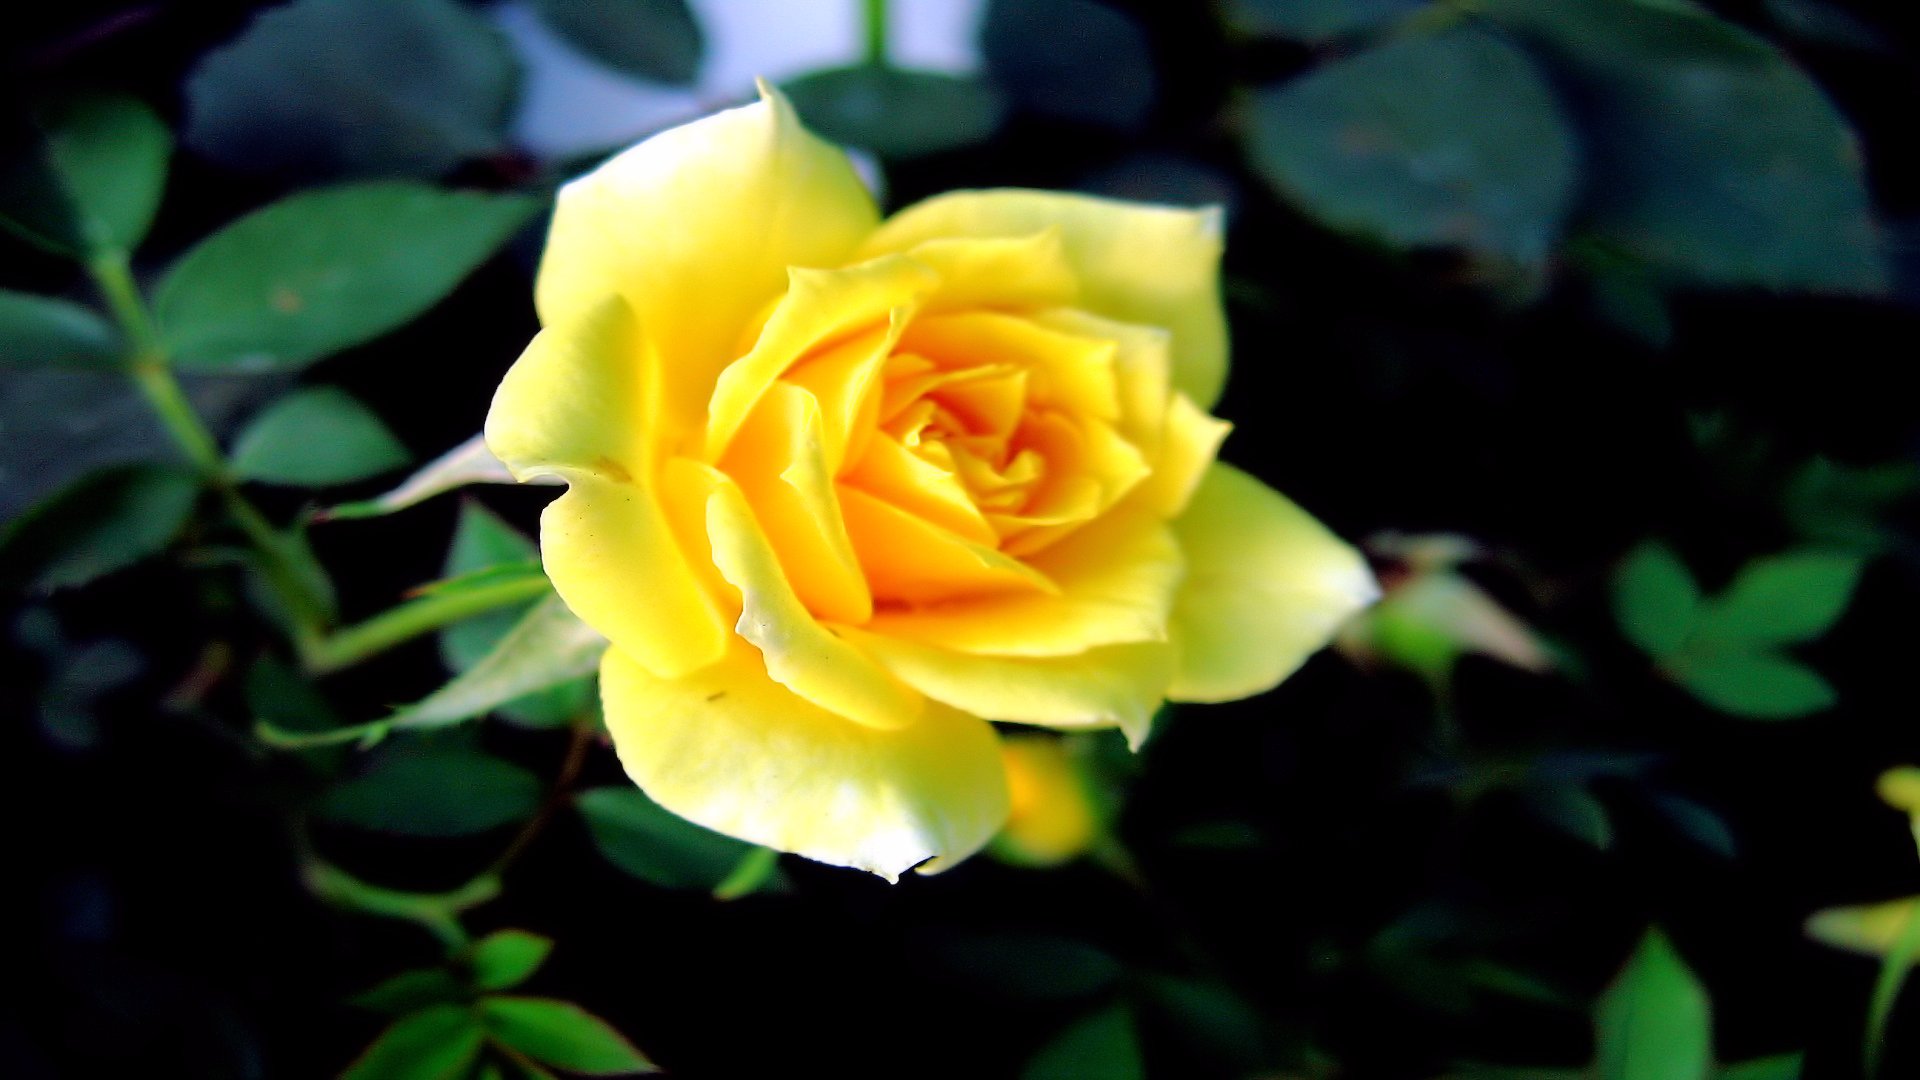 Download PC Wallpaper rose, earth, flower, yellow rose, flowers